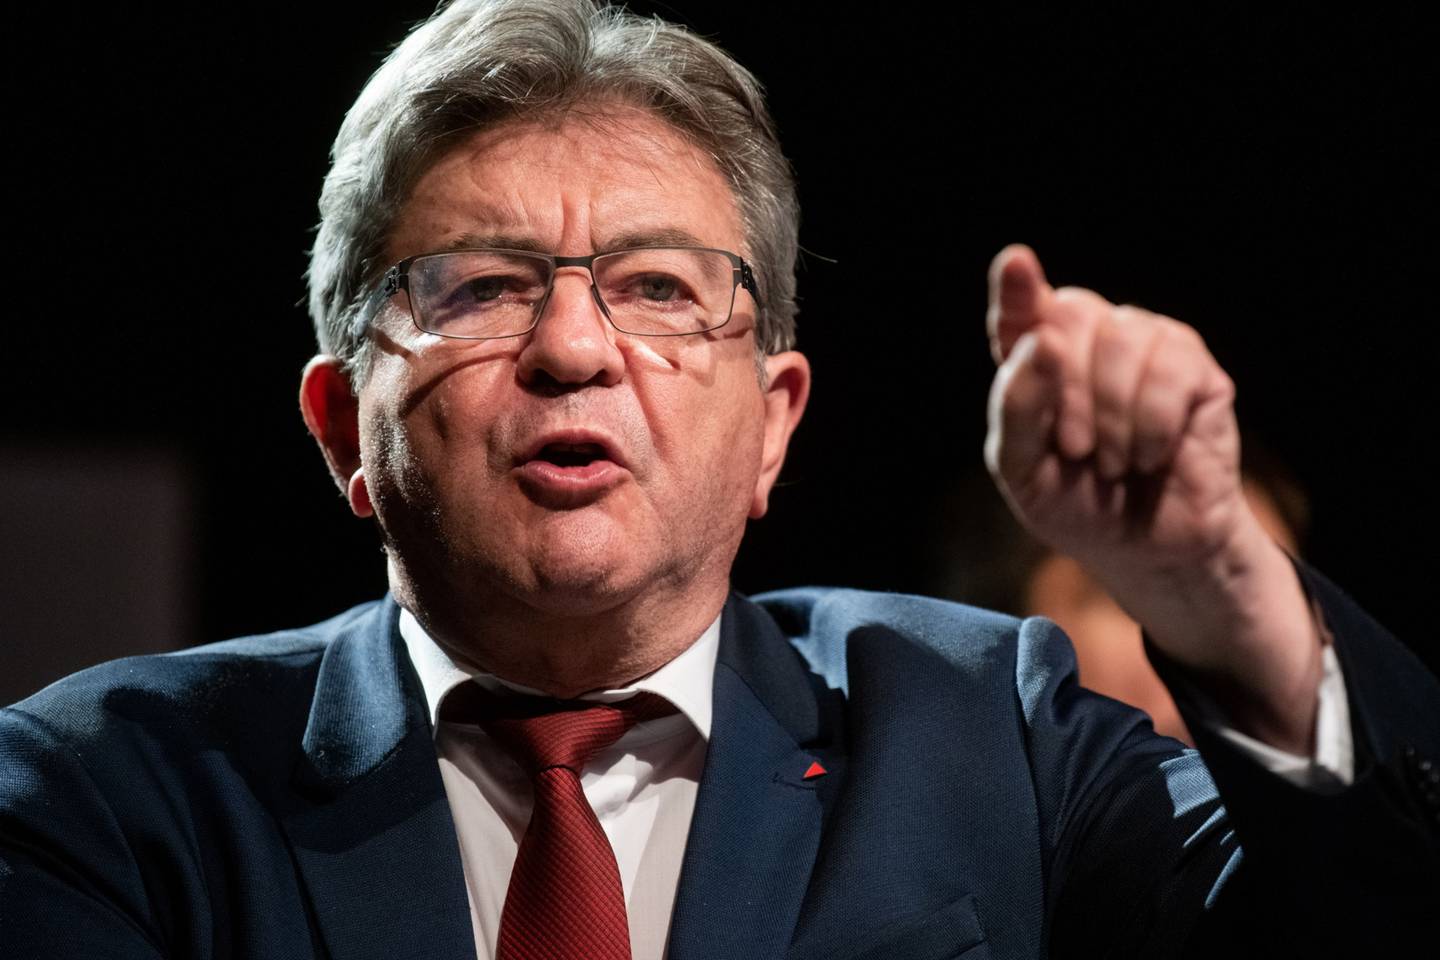 Jean-Luc Melenchon, leader of the France Unbowed party, speaks during an election night event, after the first round of voting in parliamentary elections, in Paris, on Sunday. Bloomberg